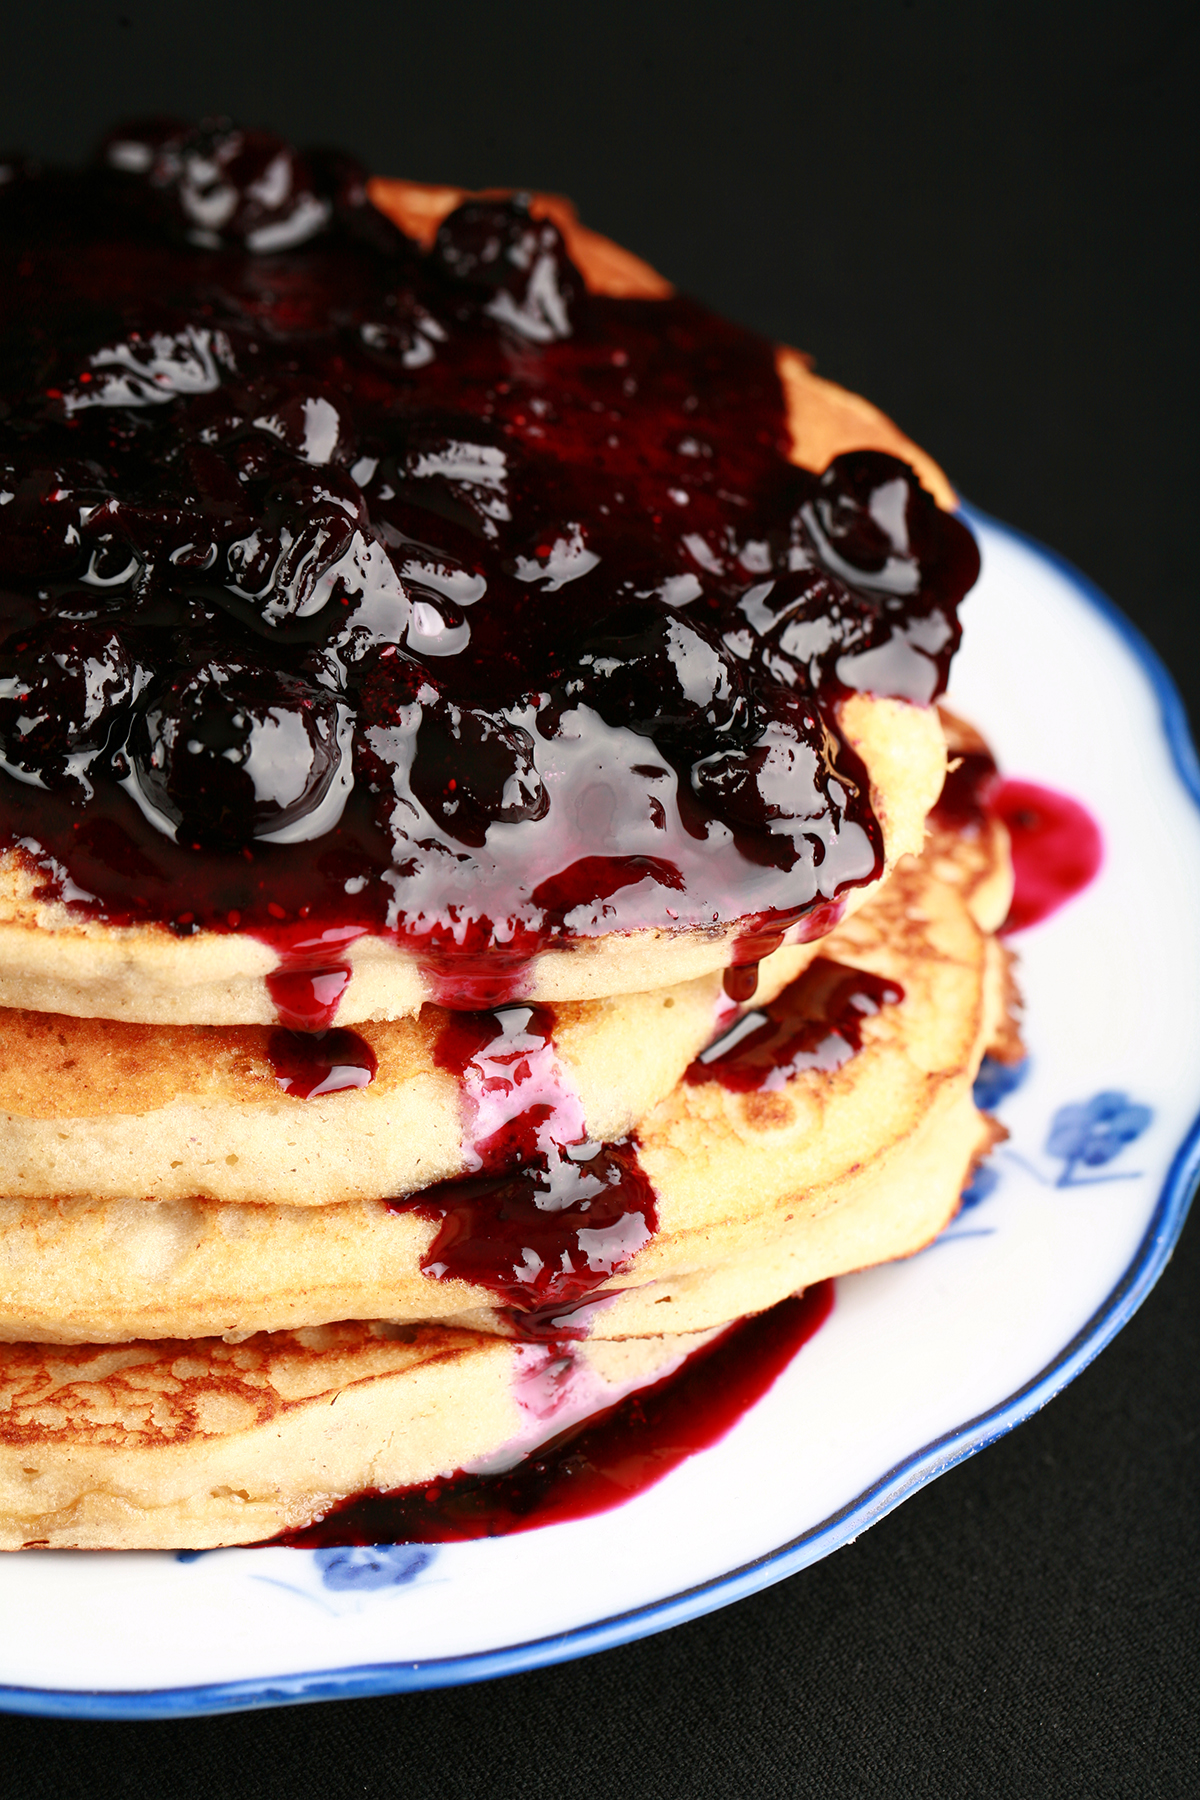 A stack of gluten-free banana buckwheat pancakes on a plate. It is topped with fresh blueberry sauce.